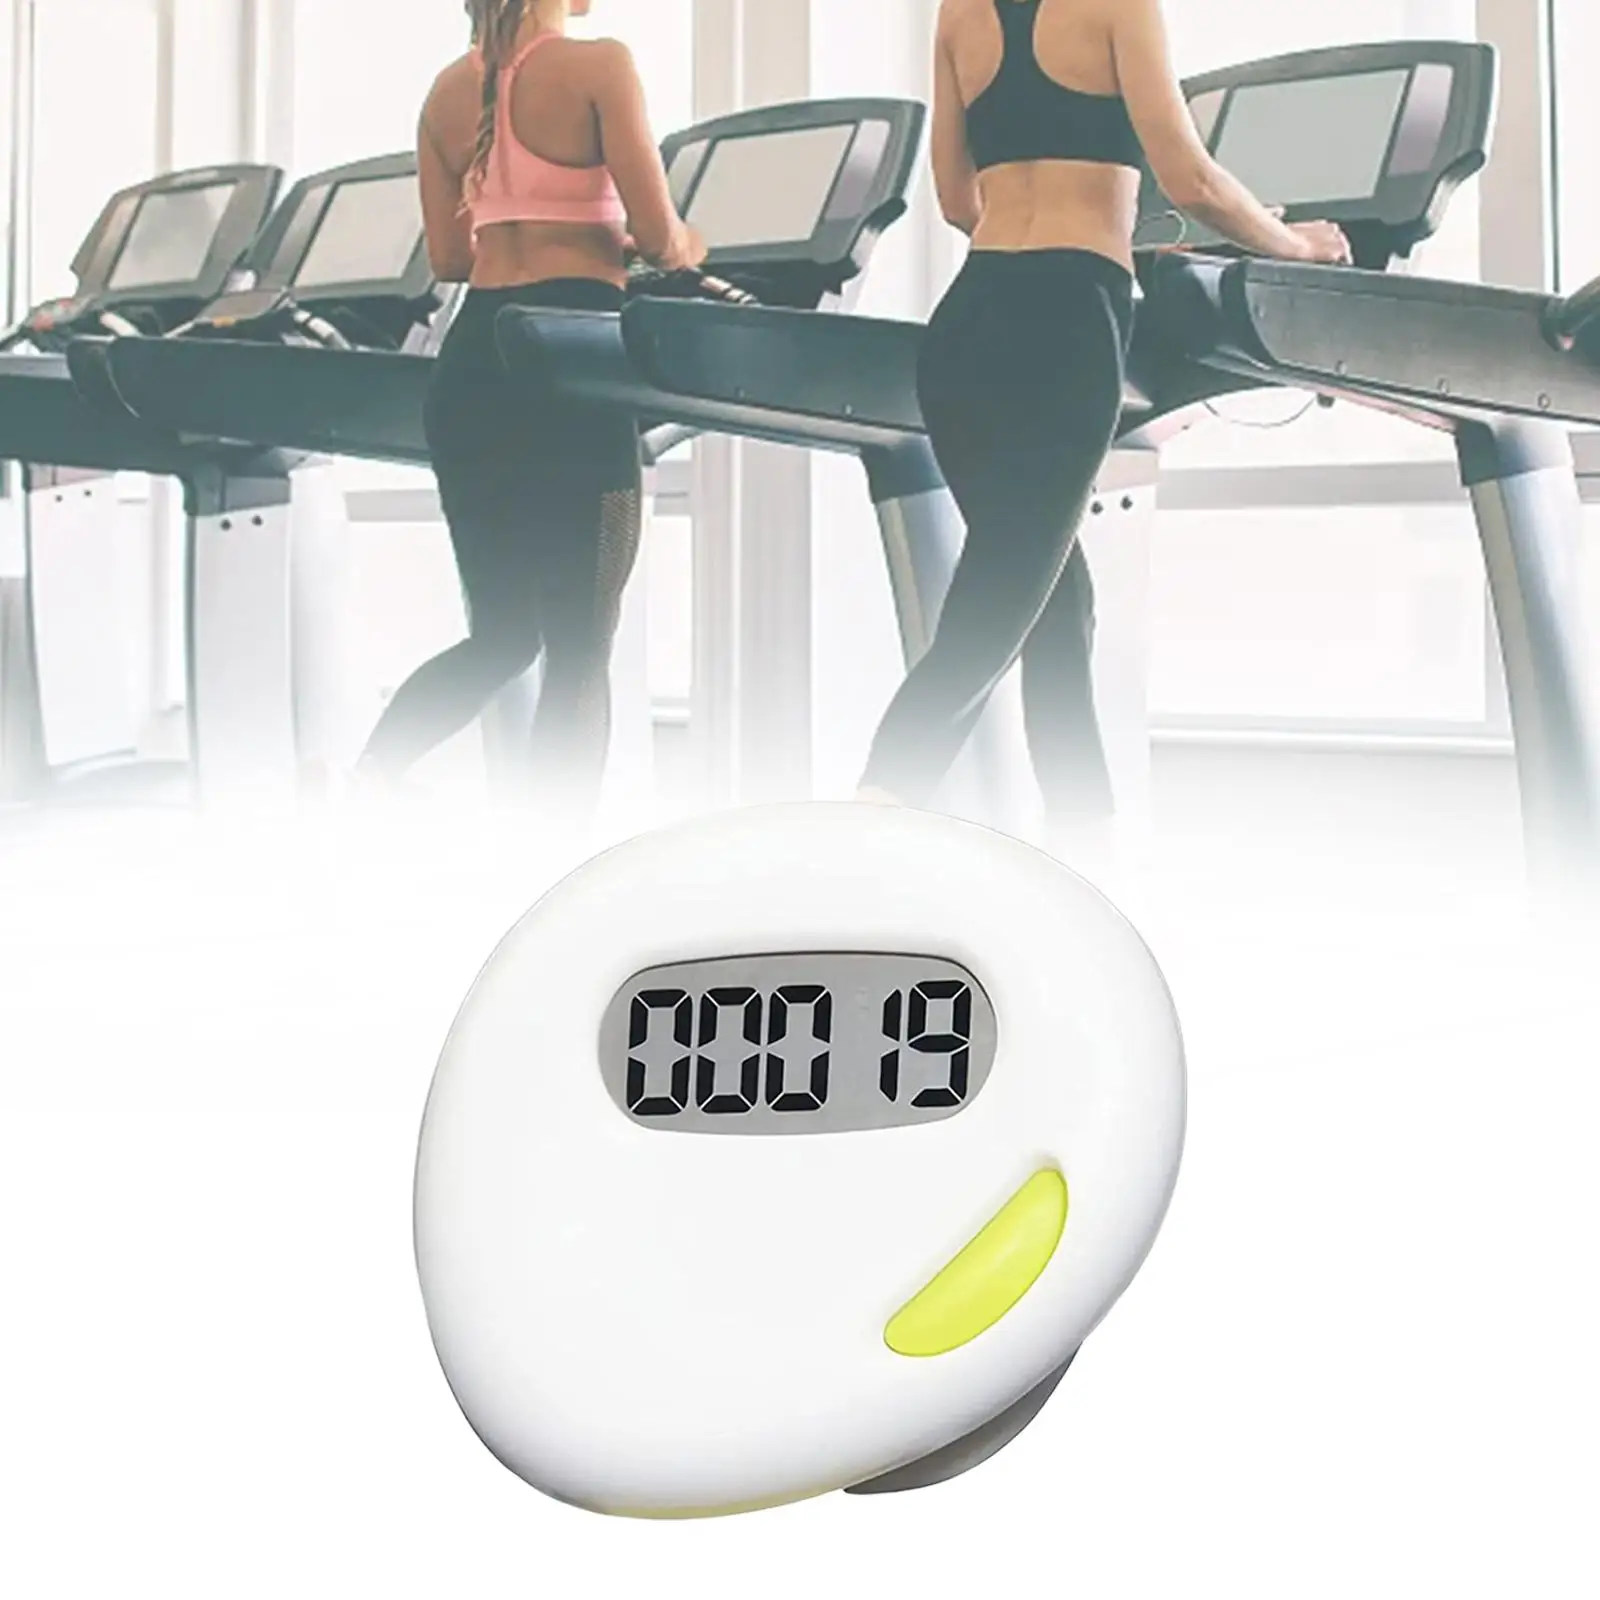 2D Pedometer Electronic Pedometer Distance Calorie Counter Walk Motion Step